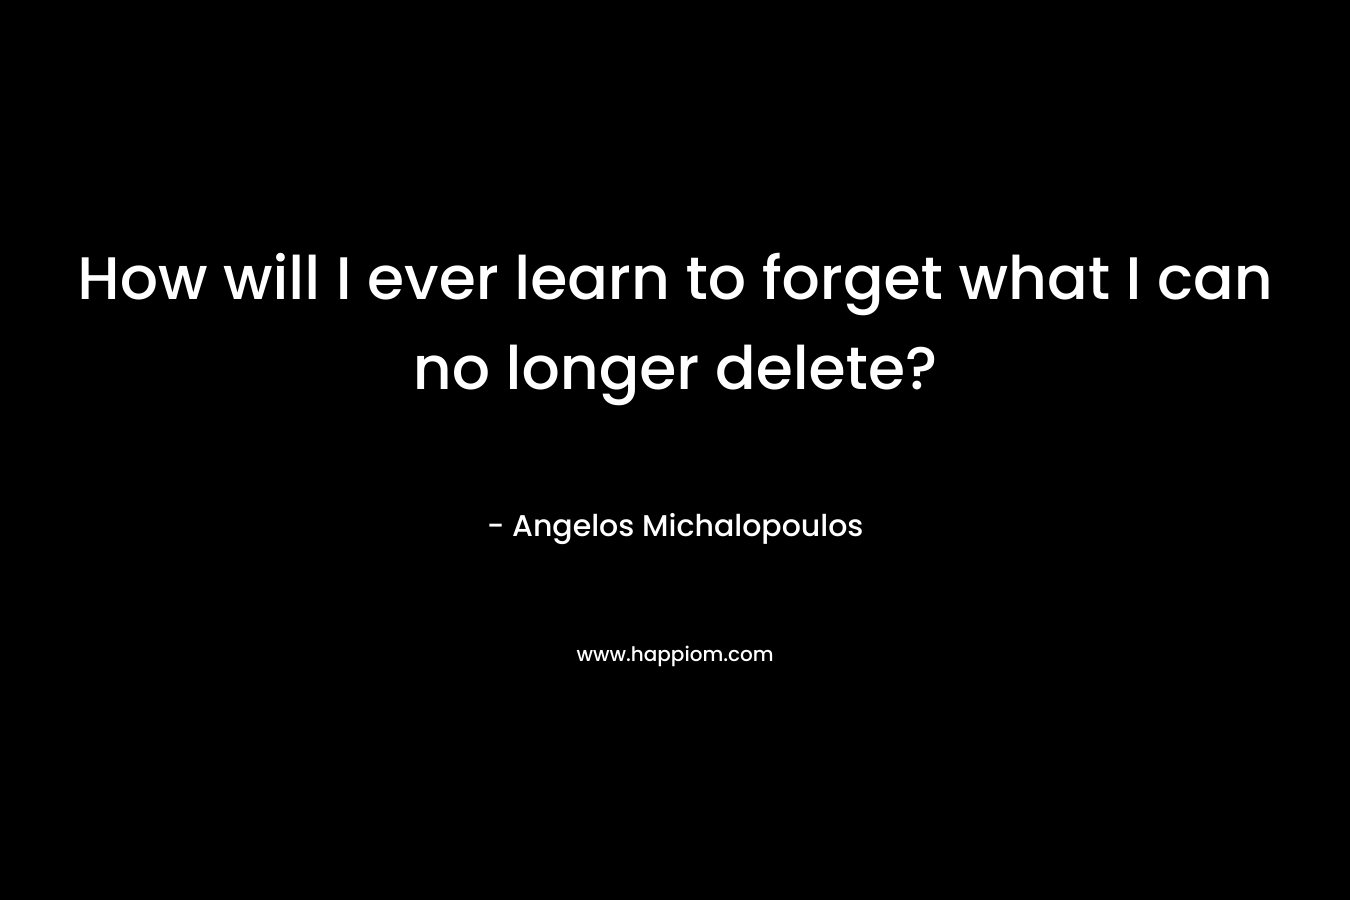 How will I ever learn to forget what I can no longer delete? – Angelos Michalopoulos